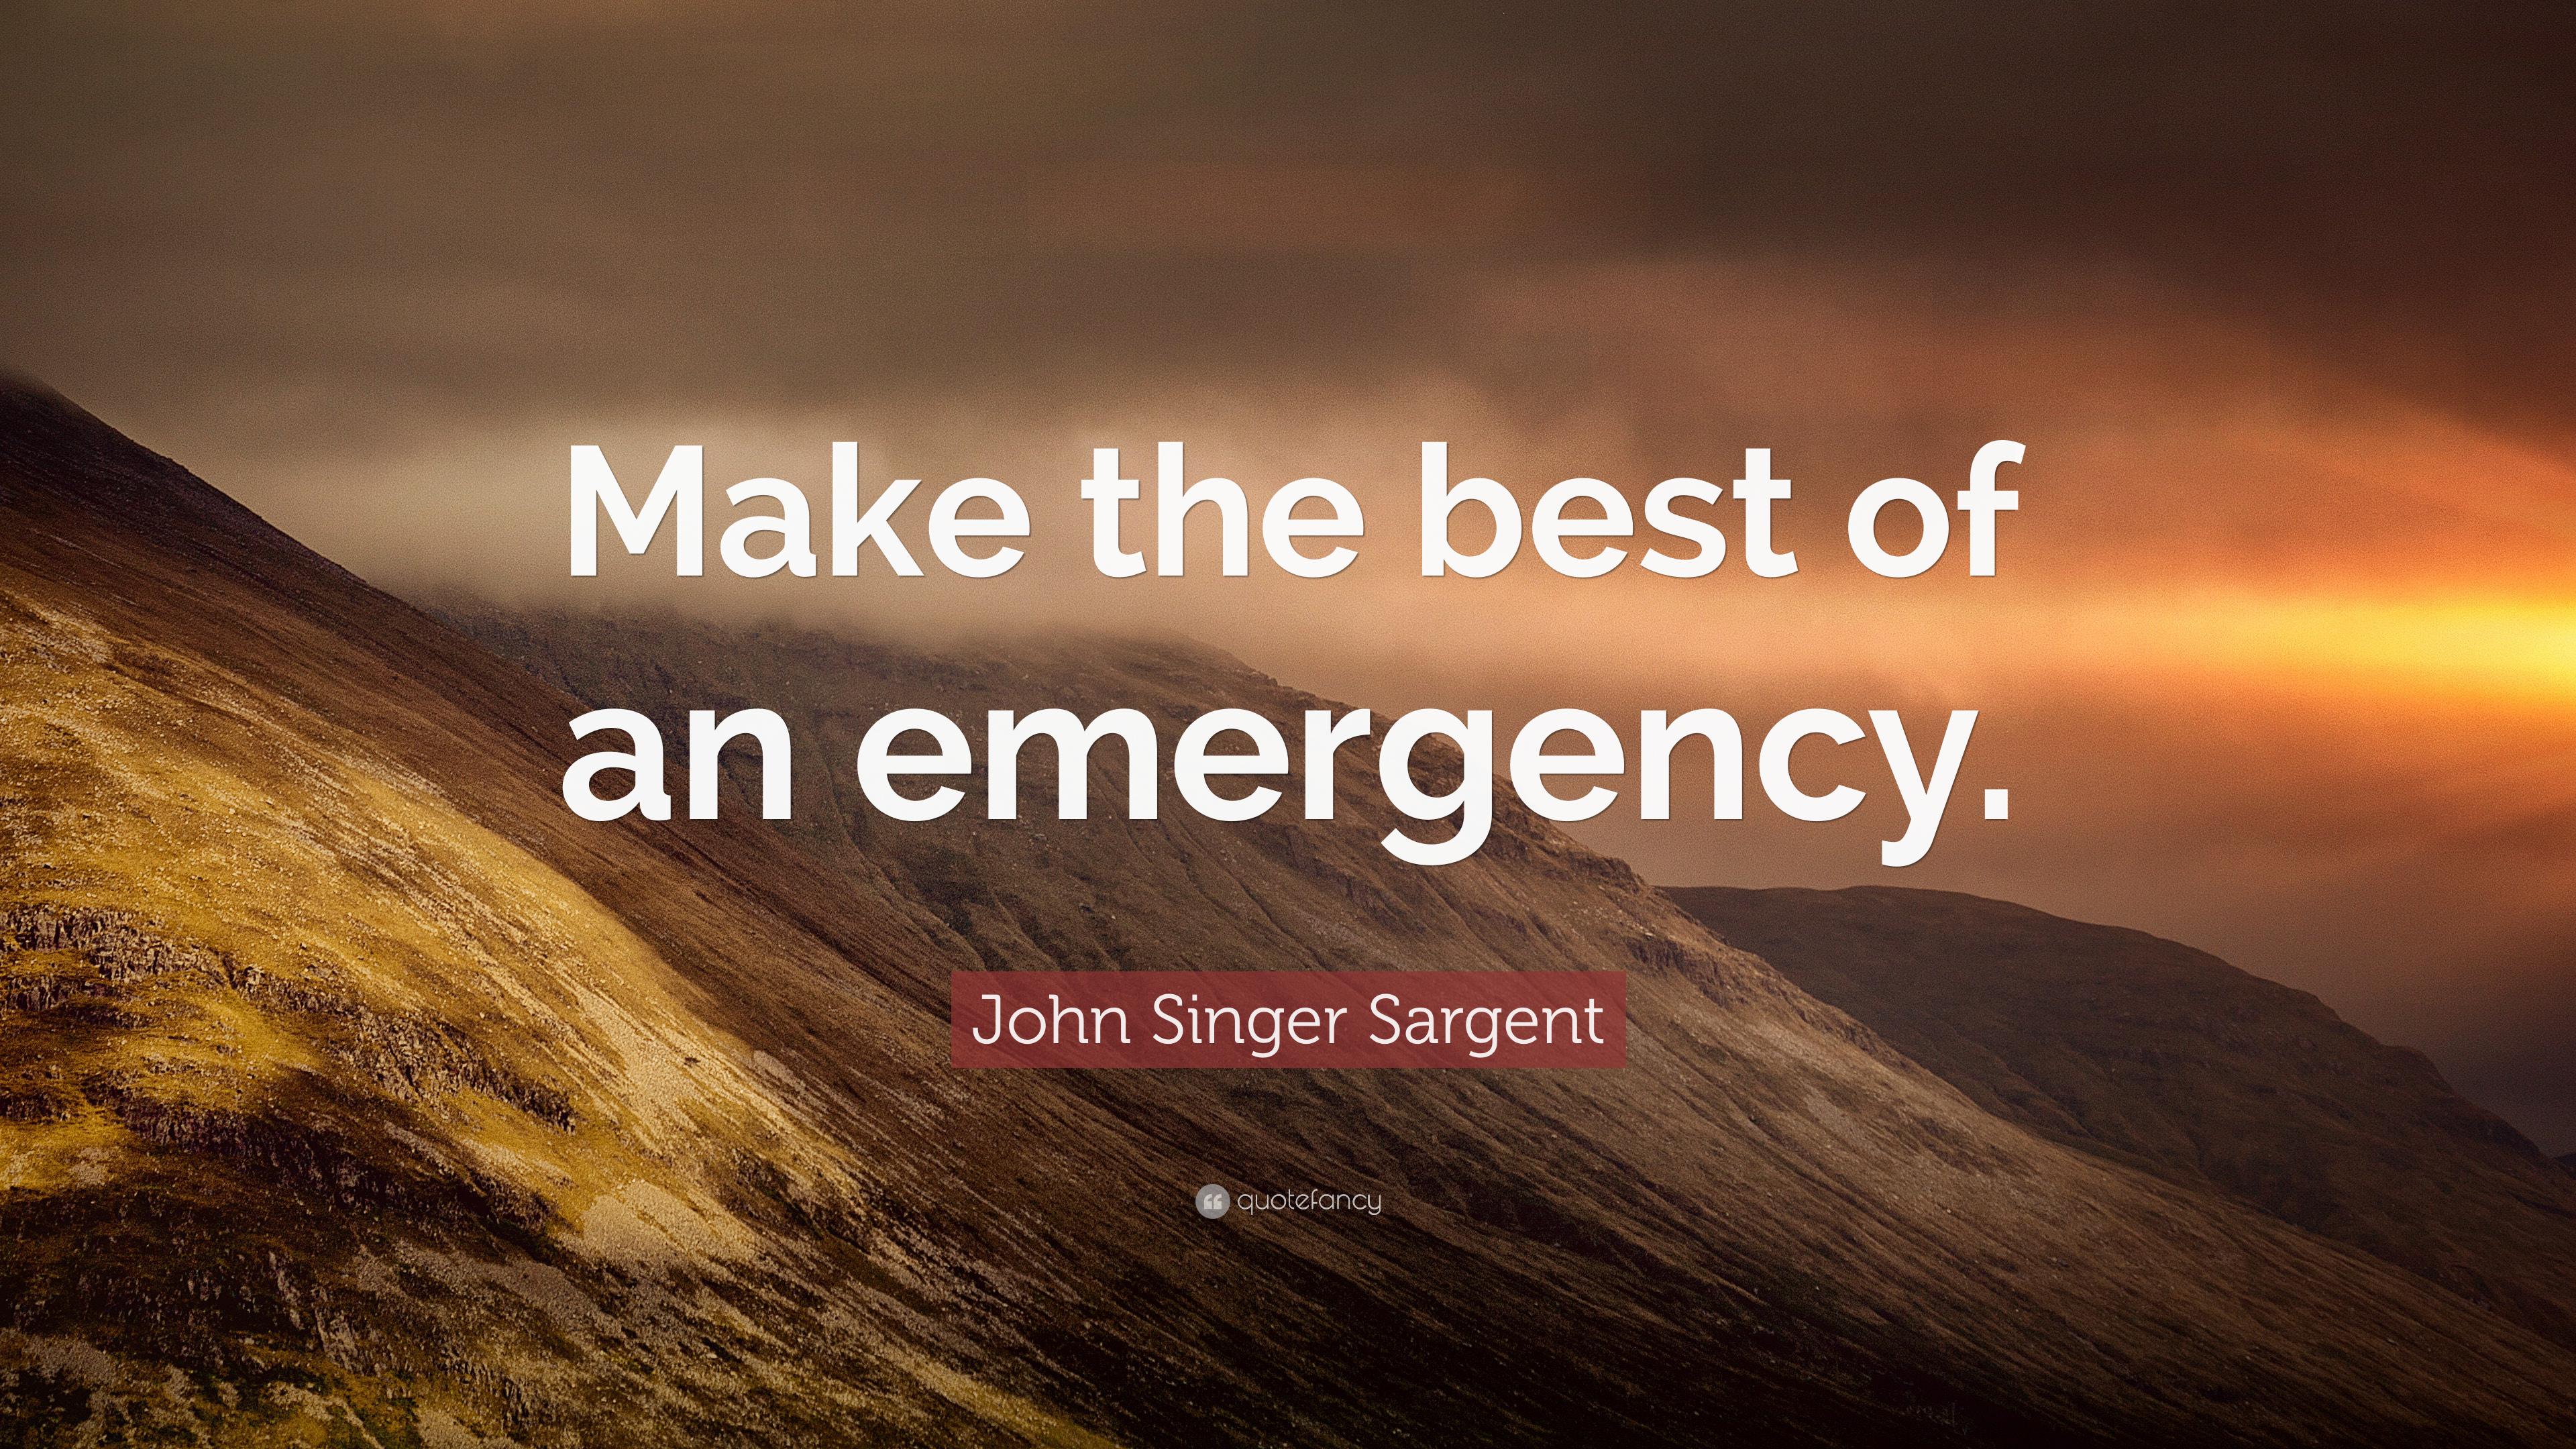 John Singer Sargent Quote: “Make the best of an emergency.” 7